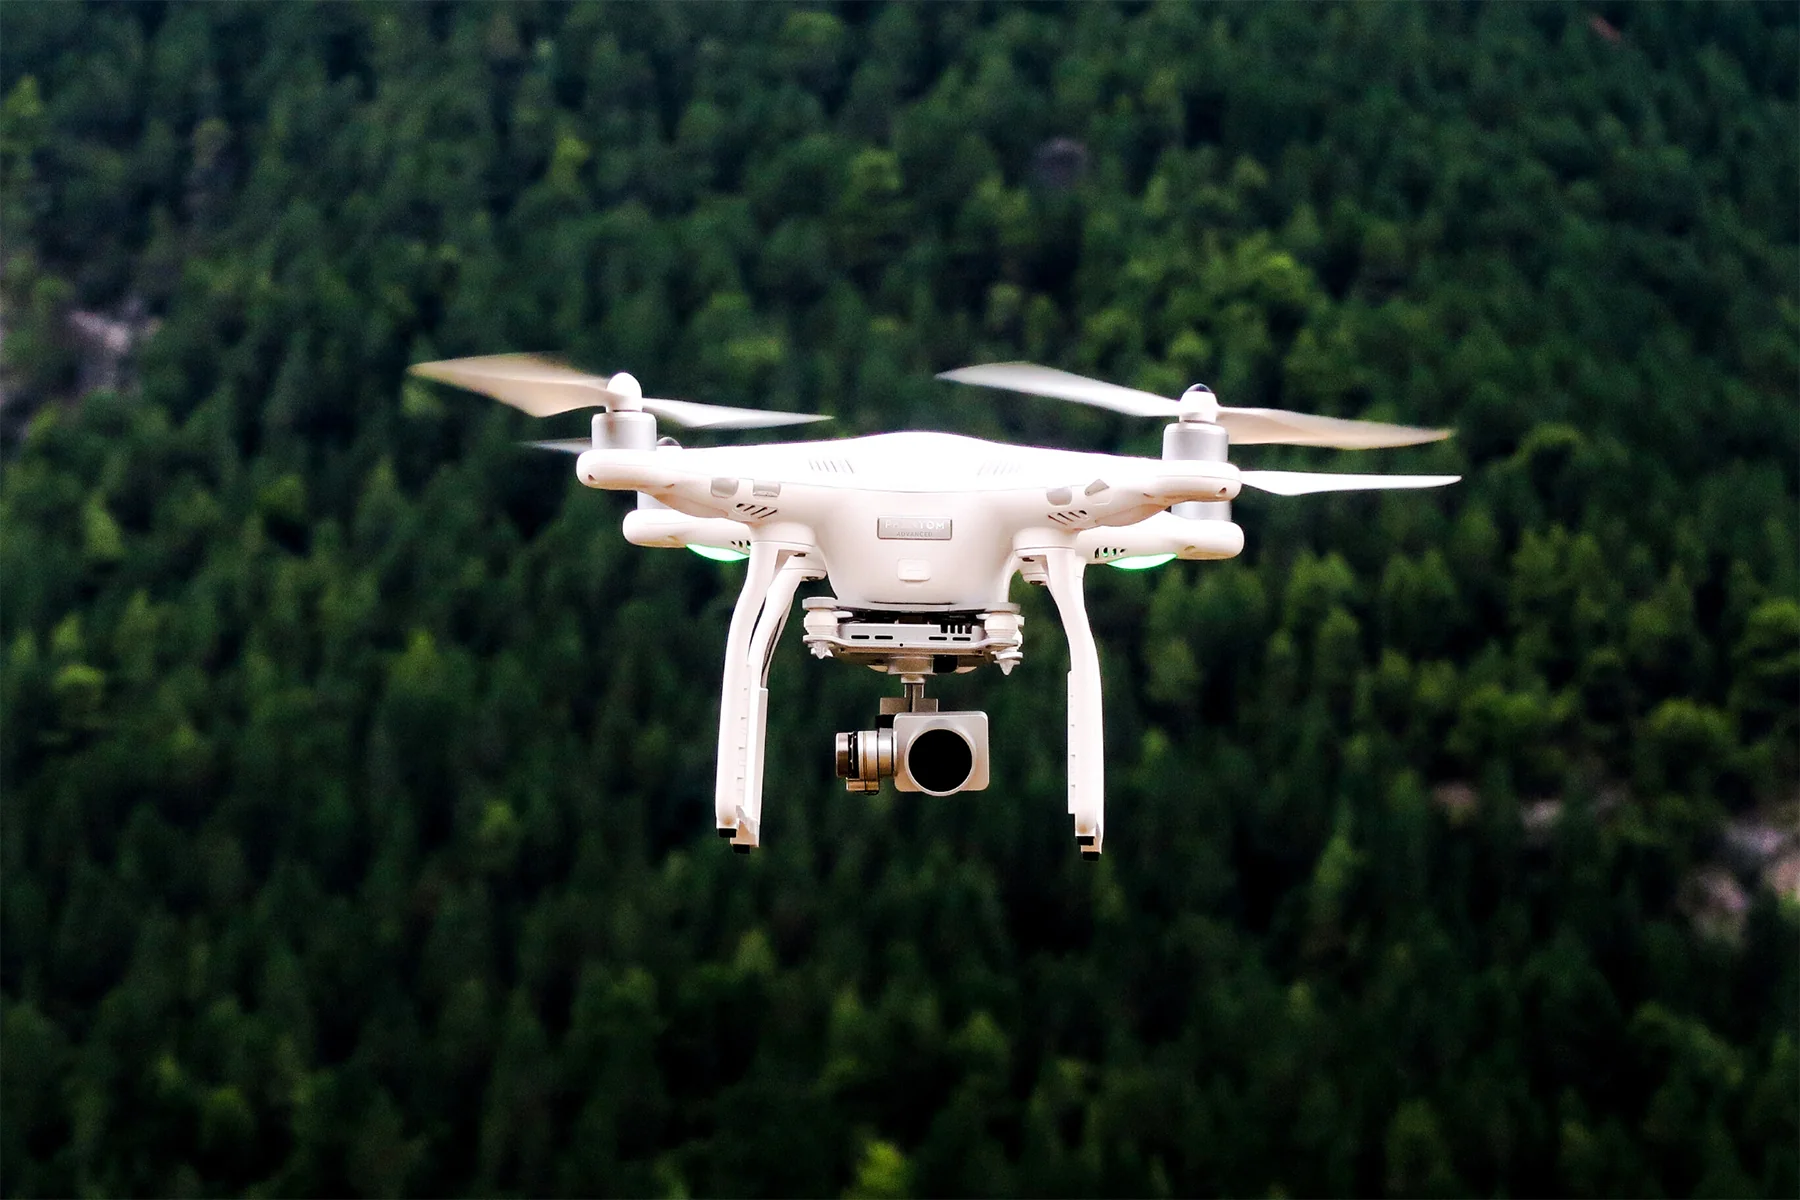 Drone in front of forest.